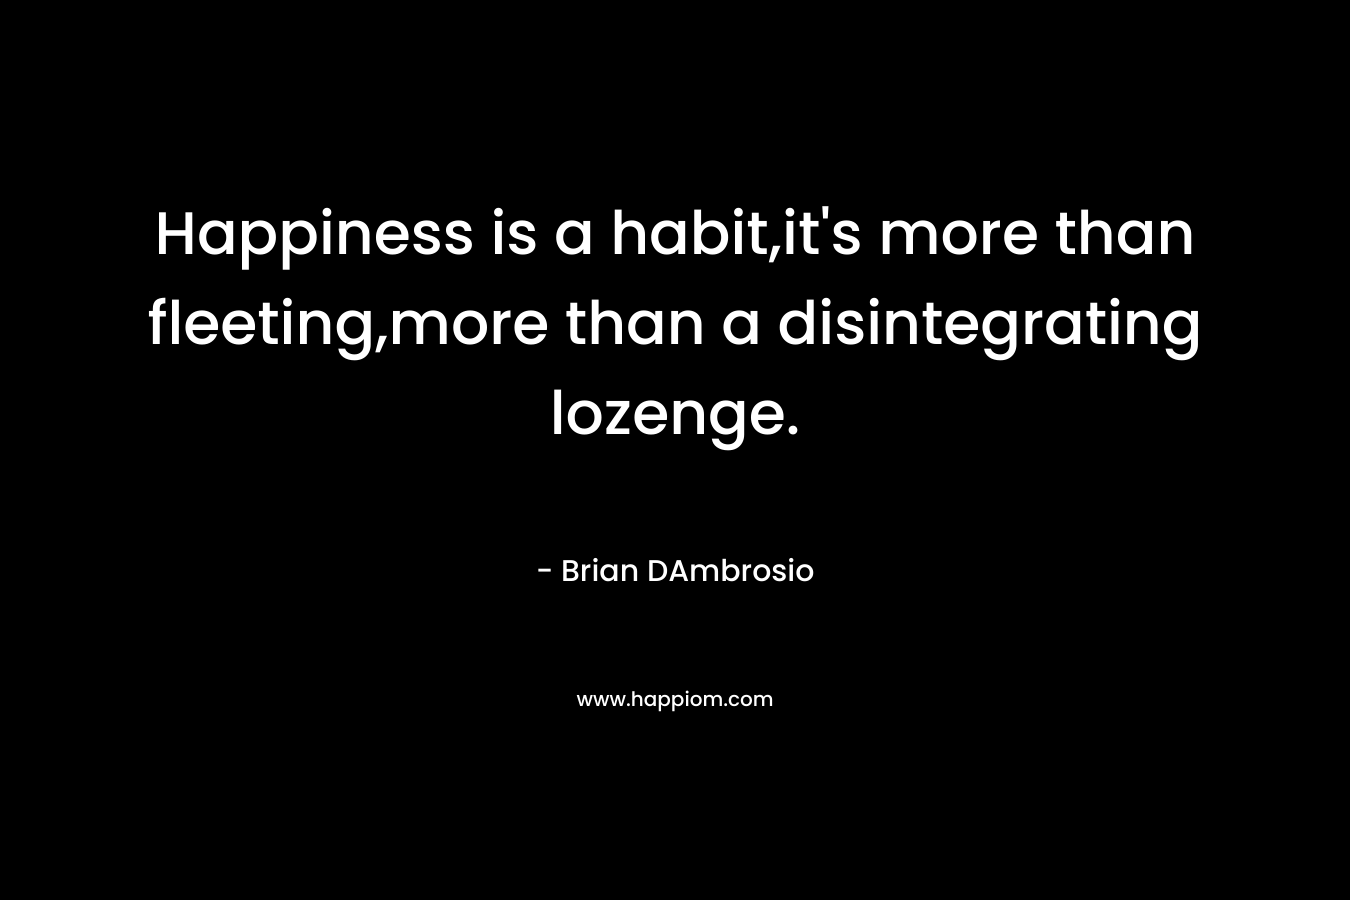 Happiness is a habit,it's more than fleeting,more than a disintegrating lozenge.